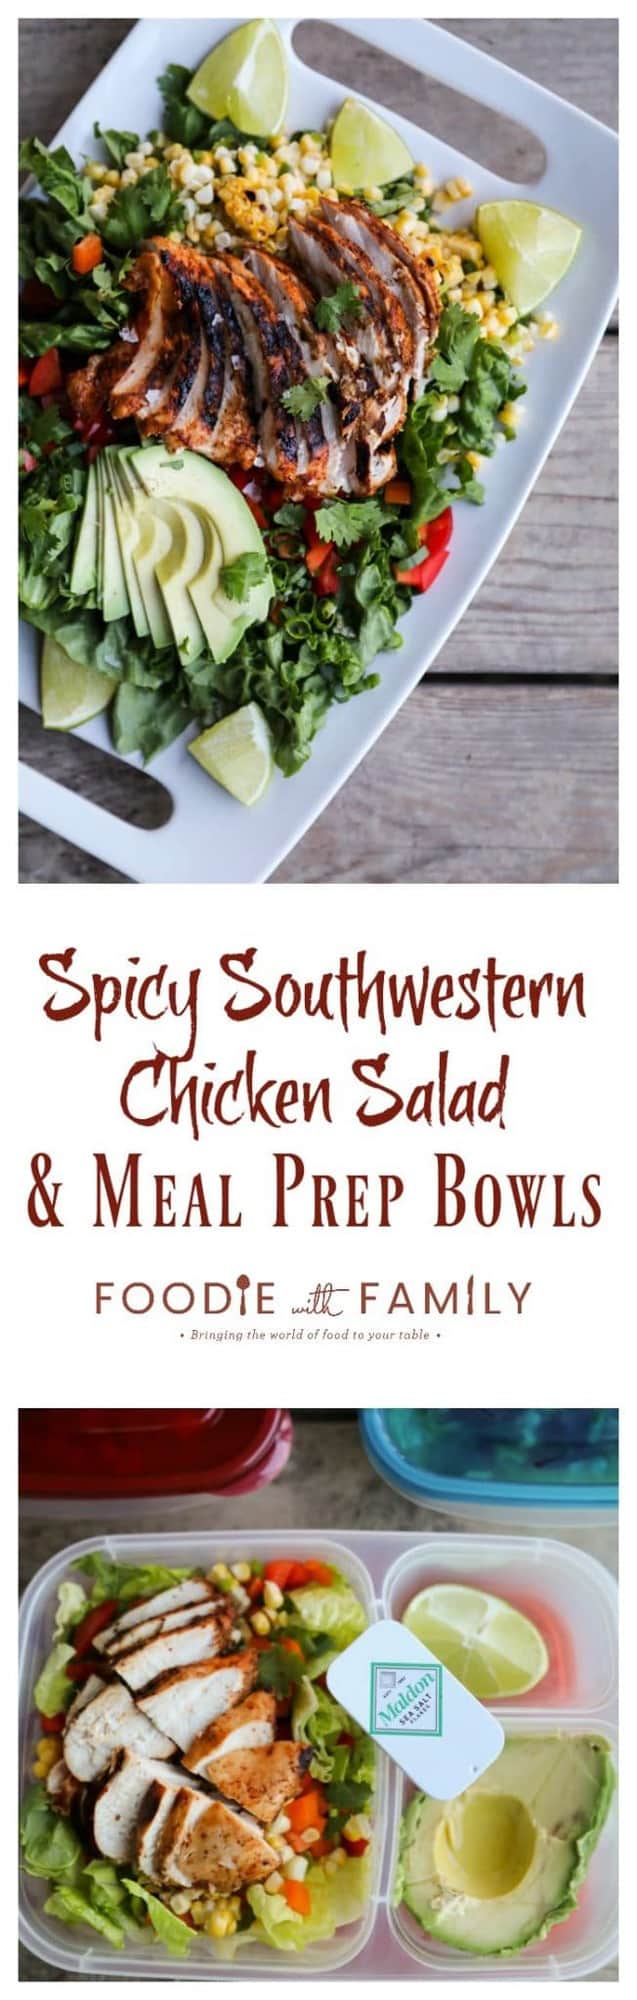 Super tasty, super simple, Spicy Southwestern Chicken Salad and Meal Prep Bowls: This three-for-one gives you an amazing batch of Spicy Southwestern Chicken, a dinner salad recipe using the chicken, and meal prep bowls using both the Chicken and the Salad!